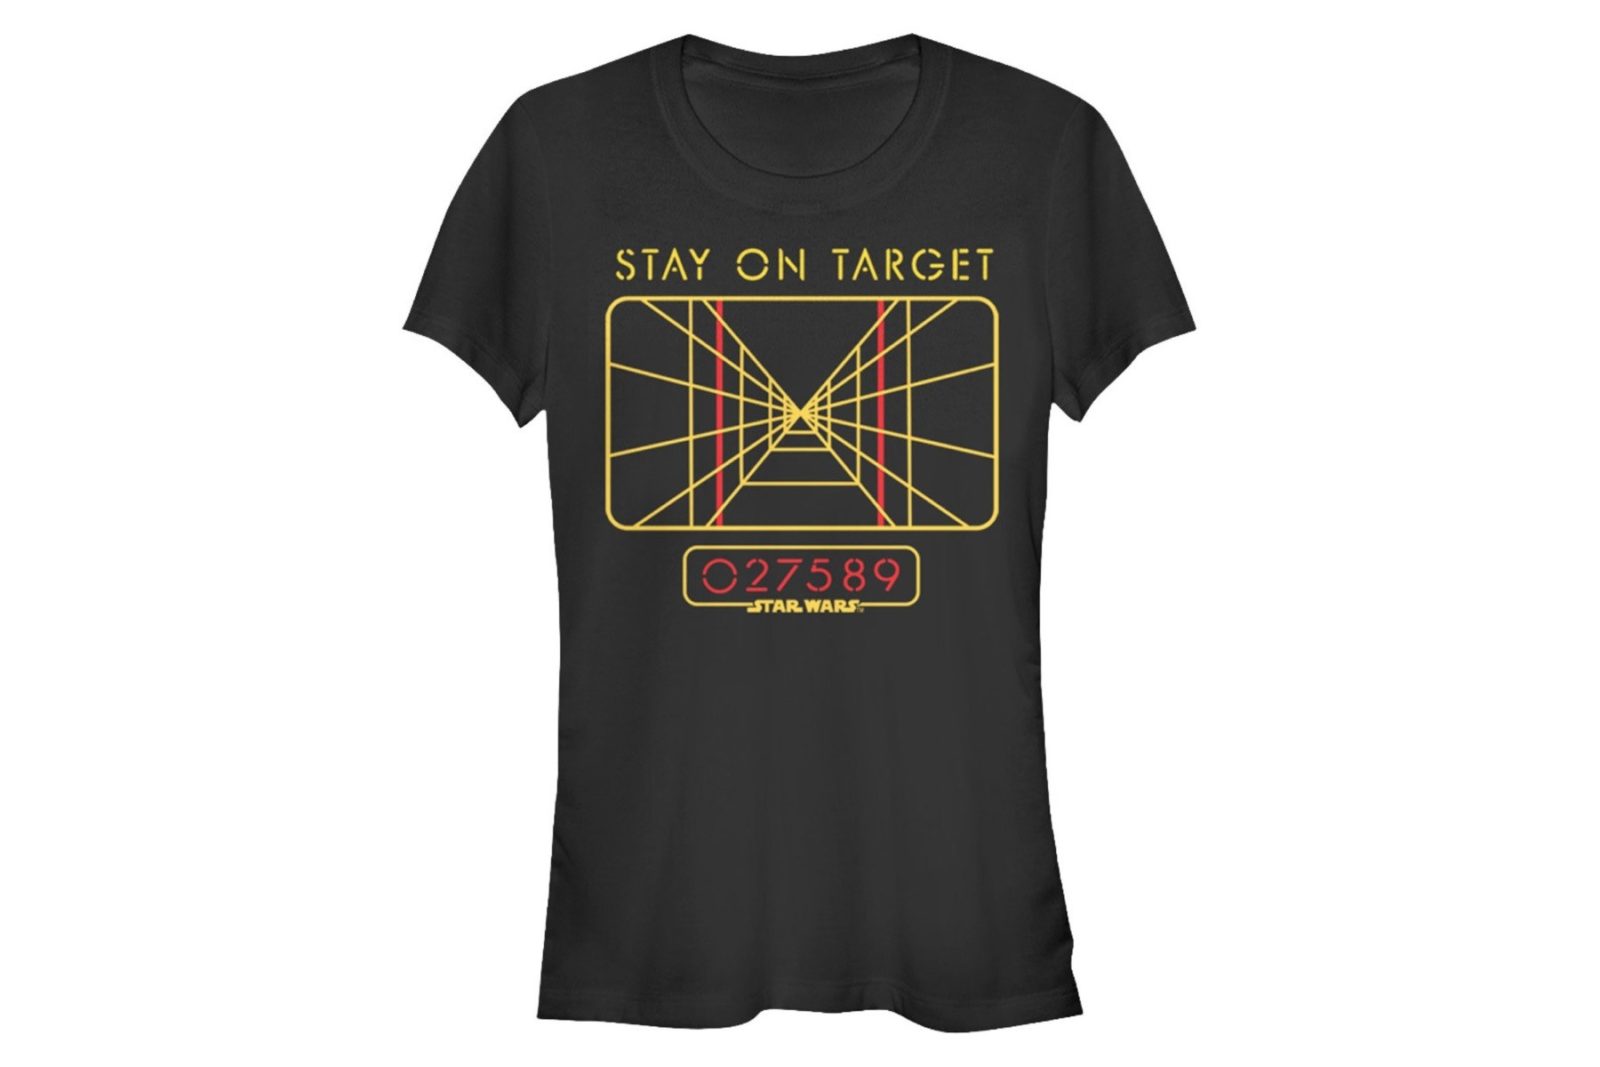 Women’s Stay On Target tee at 80’s Tees